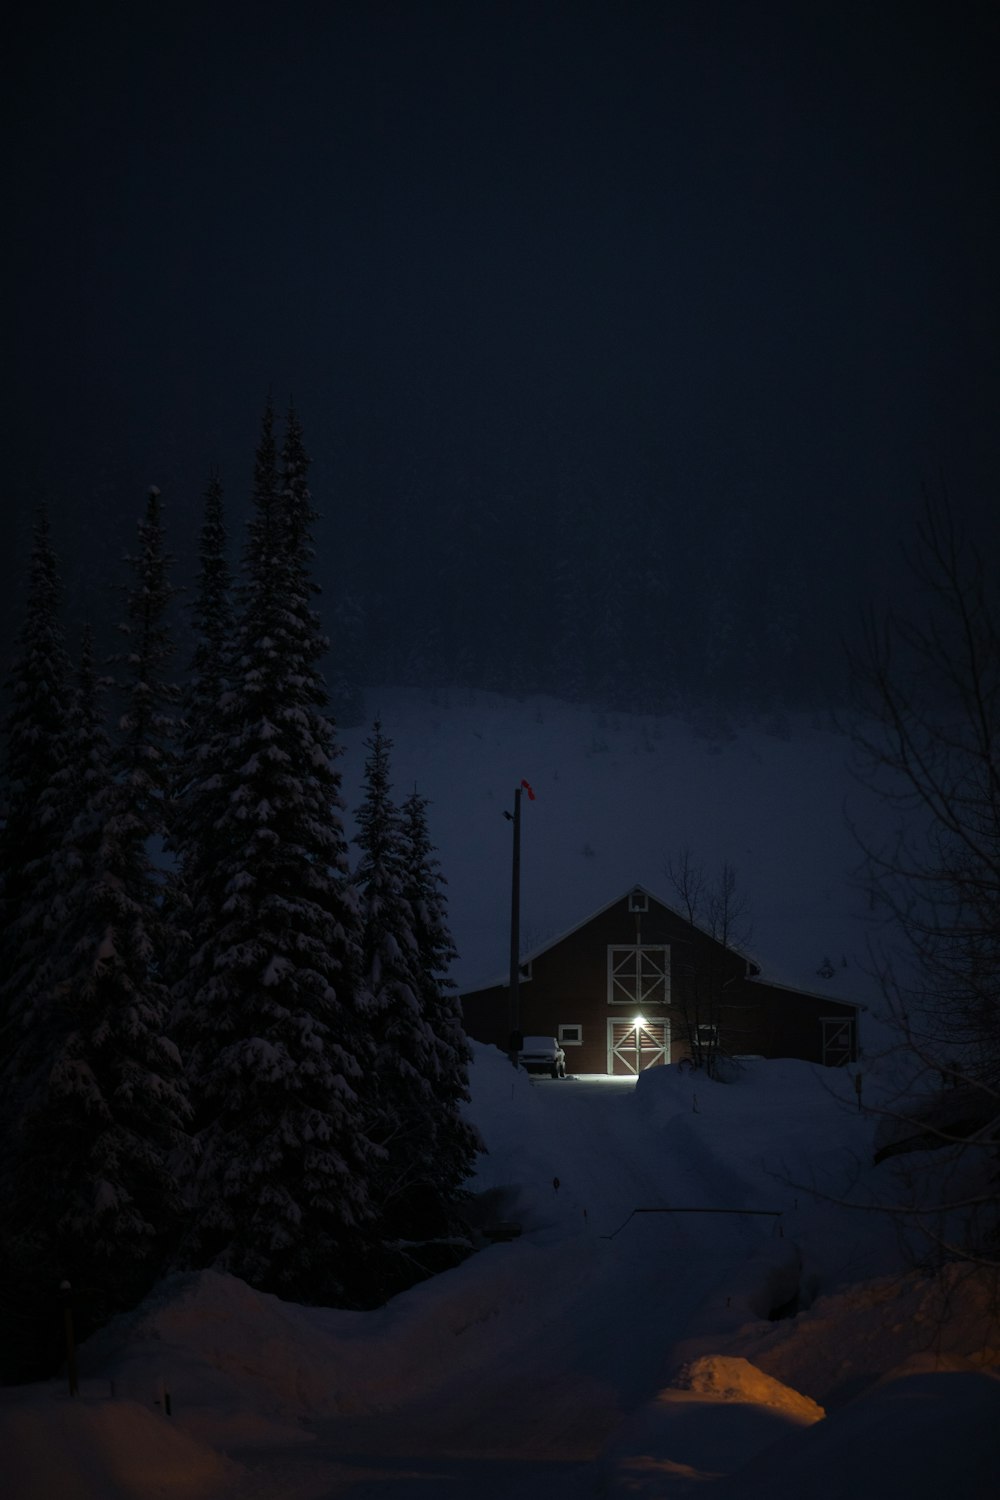 a cabin is lit up at night in the snow